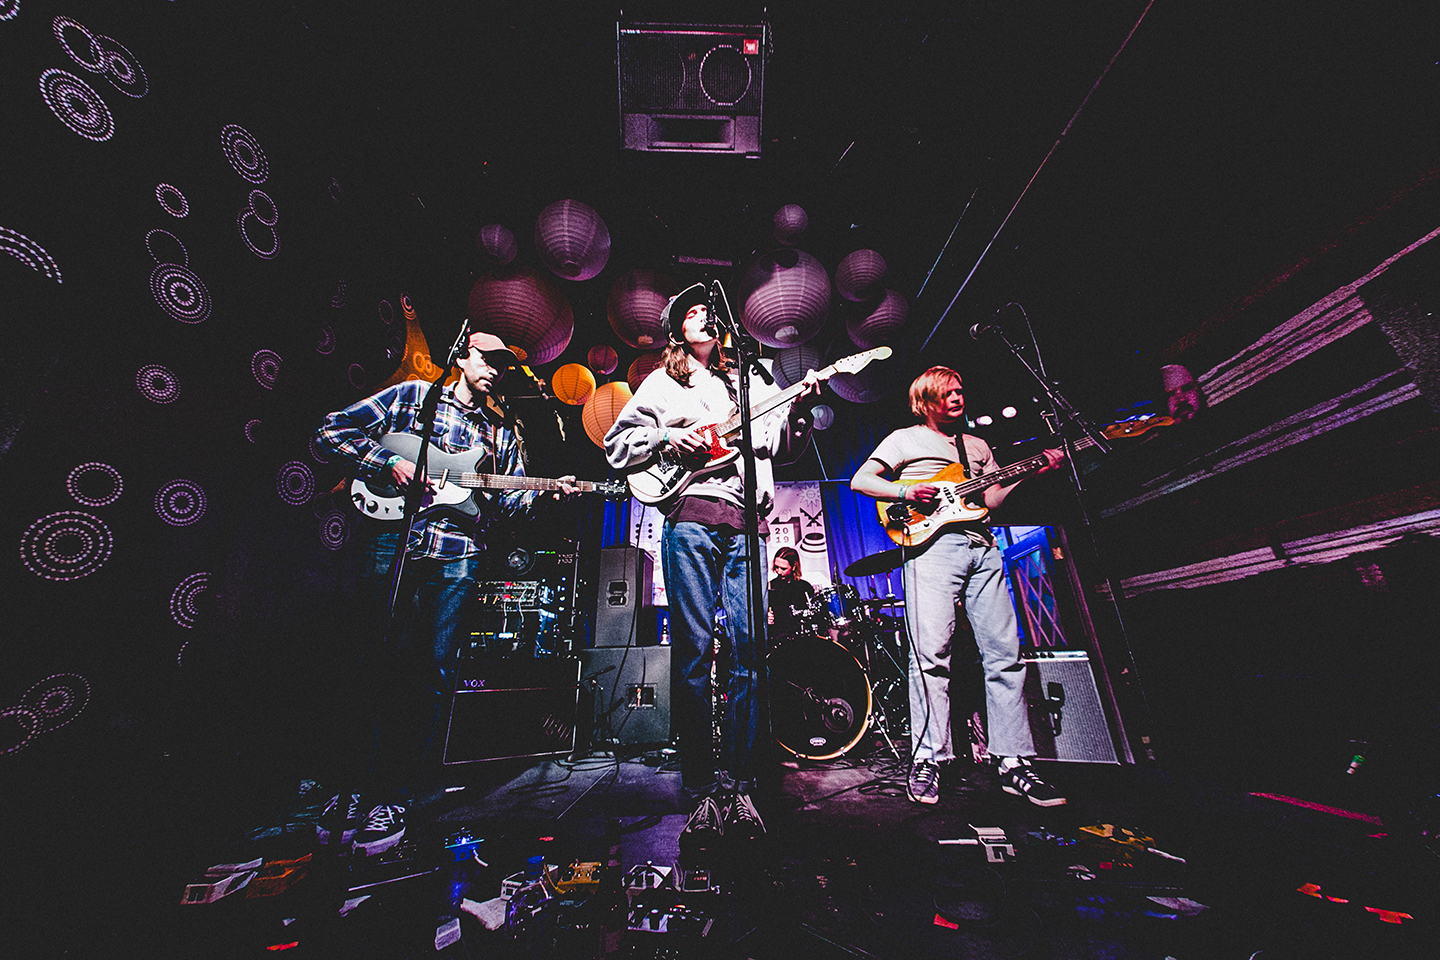 Magic Potion at Velveeta Room, presented by PNKSLM Recordings – Photo by Dylan Johnson